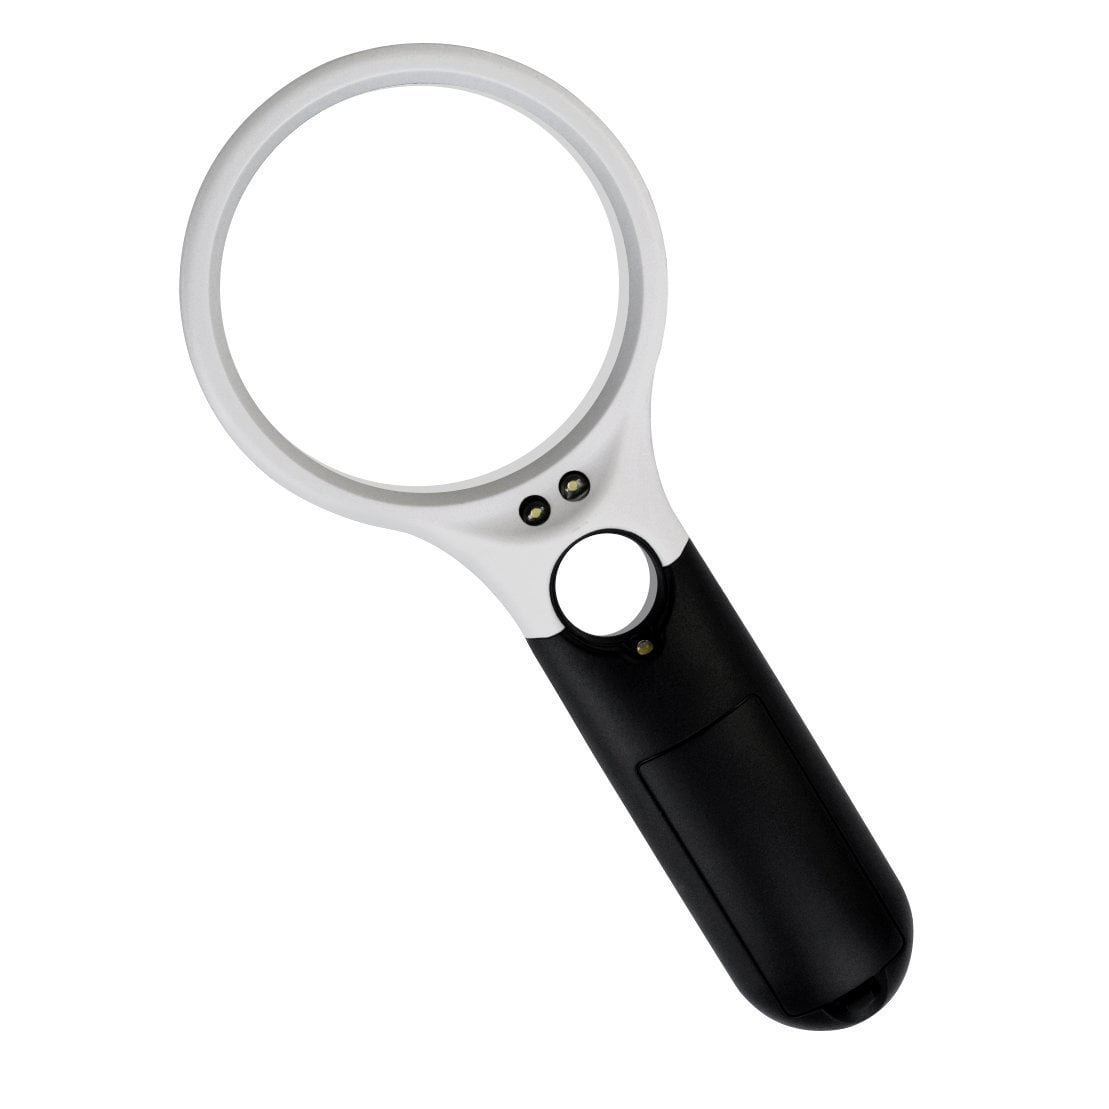 Glam Hobby 3 LED Light 3X 45X Handheld Magnifier Reading Magnifying Glass Lens Jewelry Loupe White and Black 